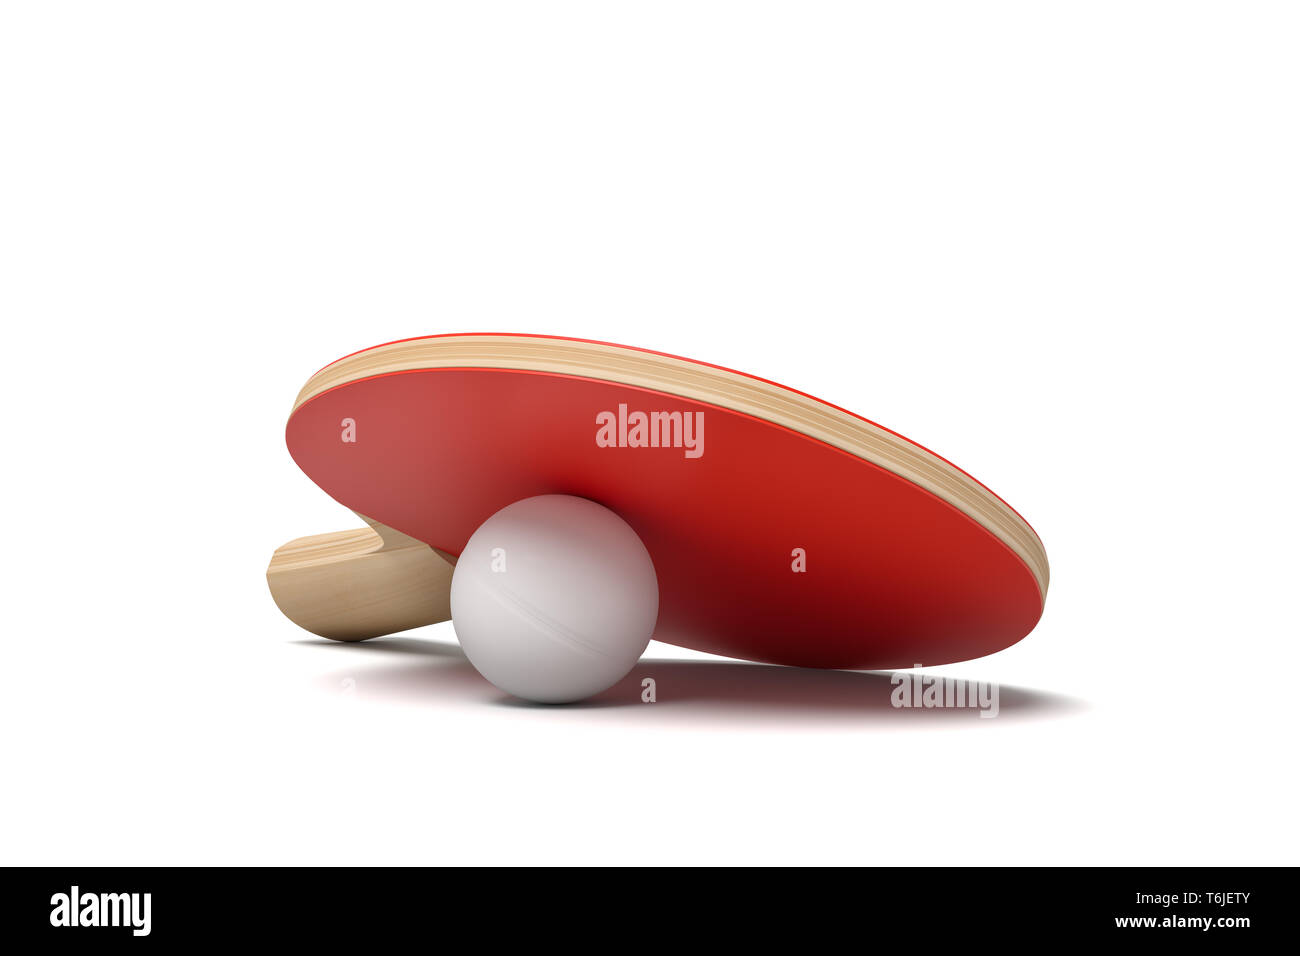 3d close-up rendering of ping pong ball covered with racket and on white background. Stock Photo